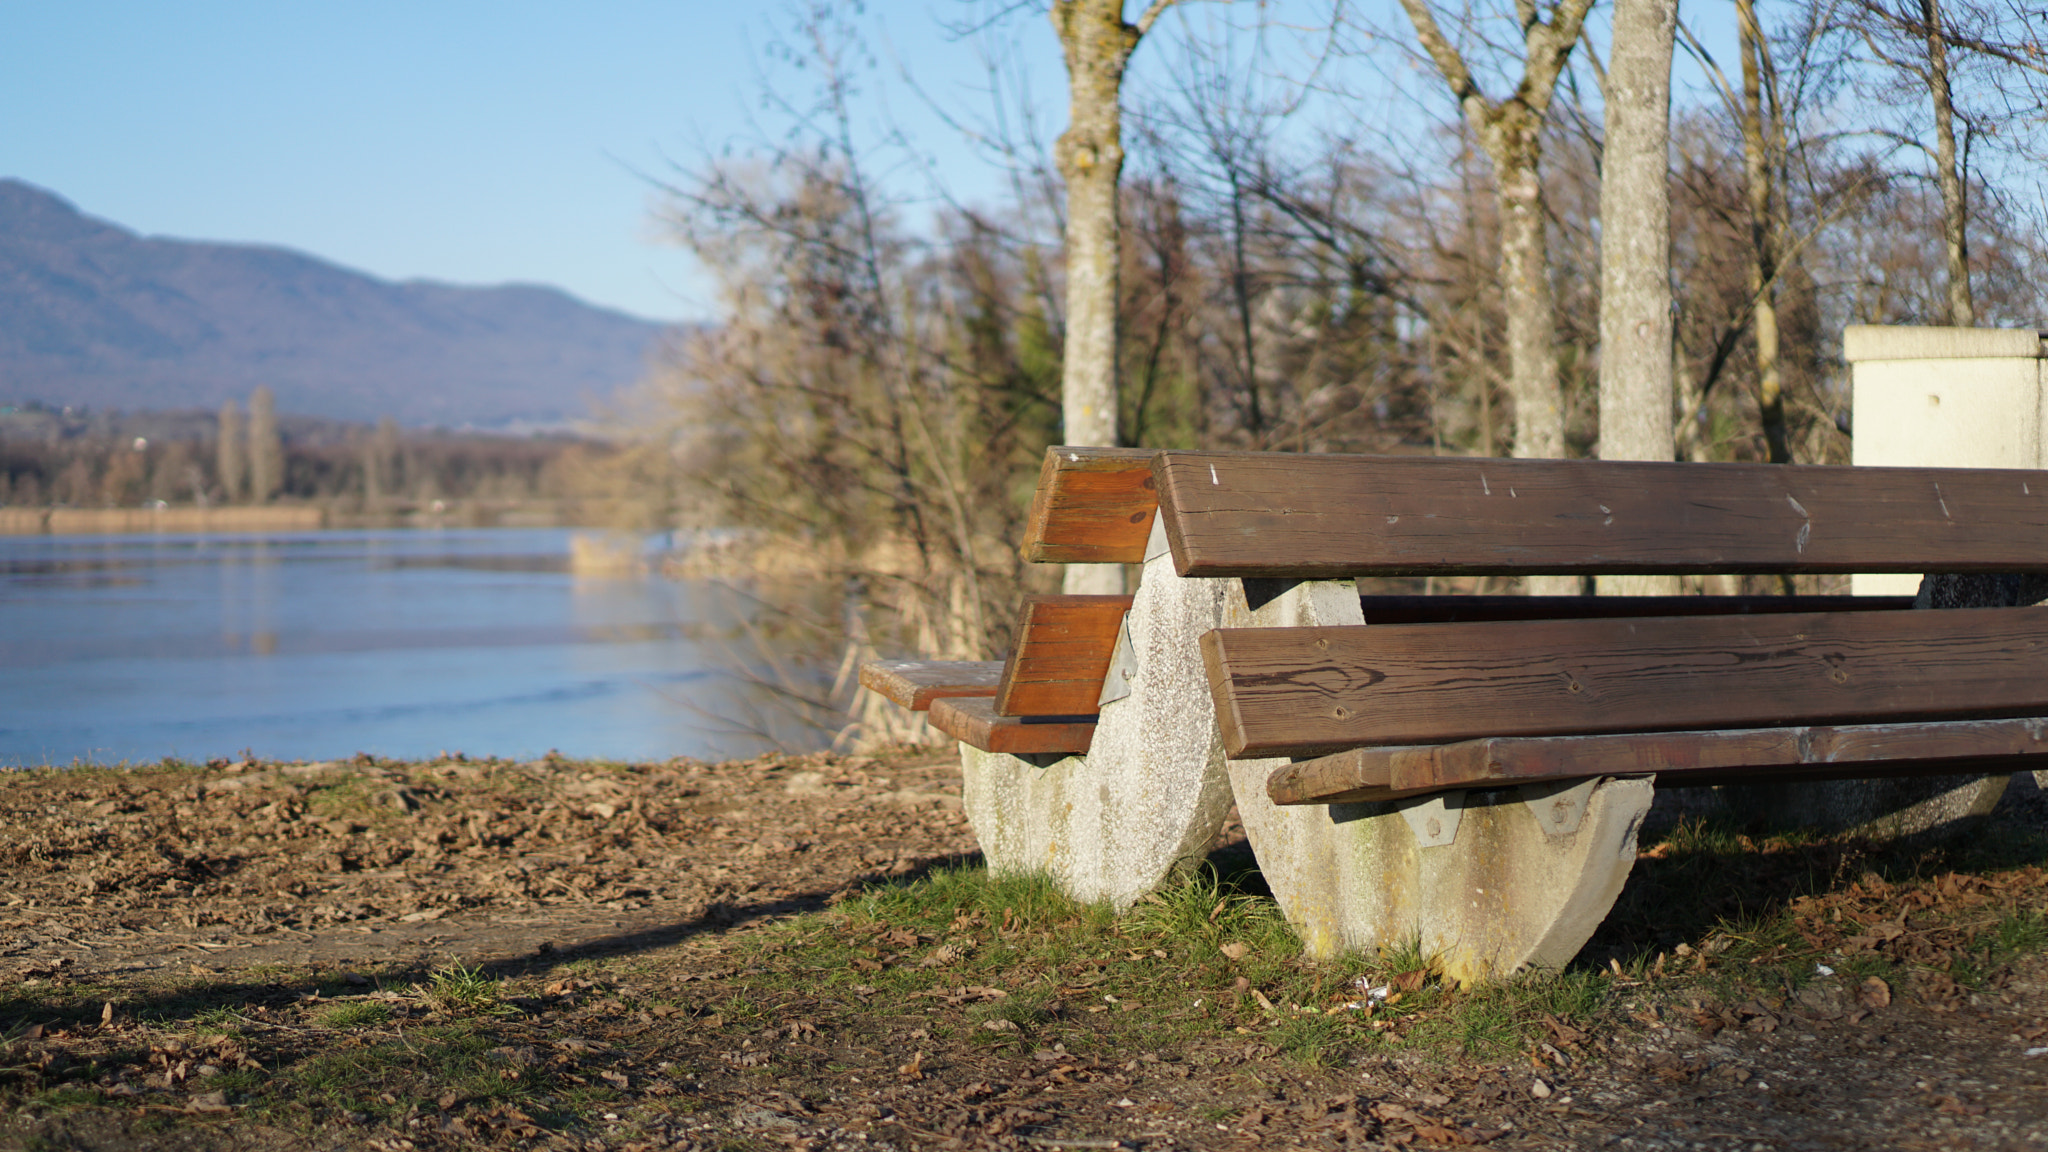 Sony a6500 sample photo. Lakeside bench photography